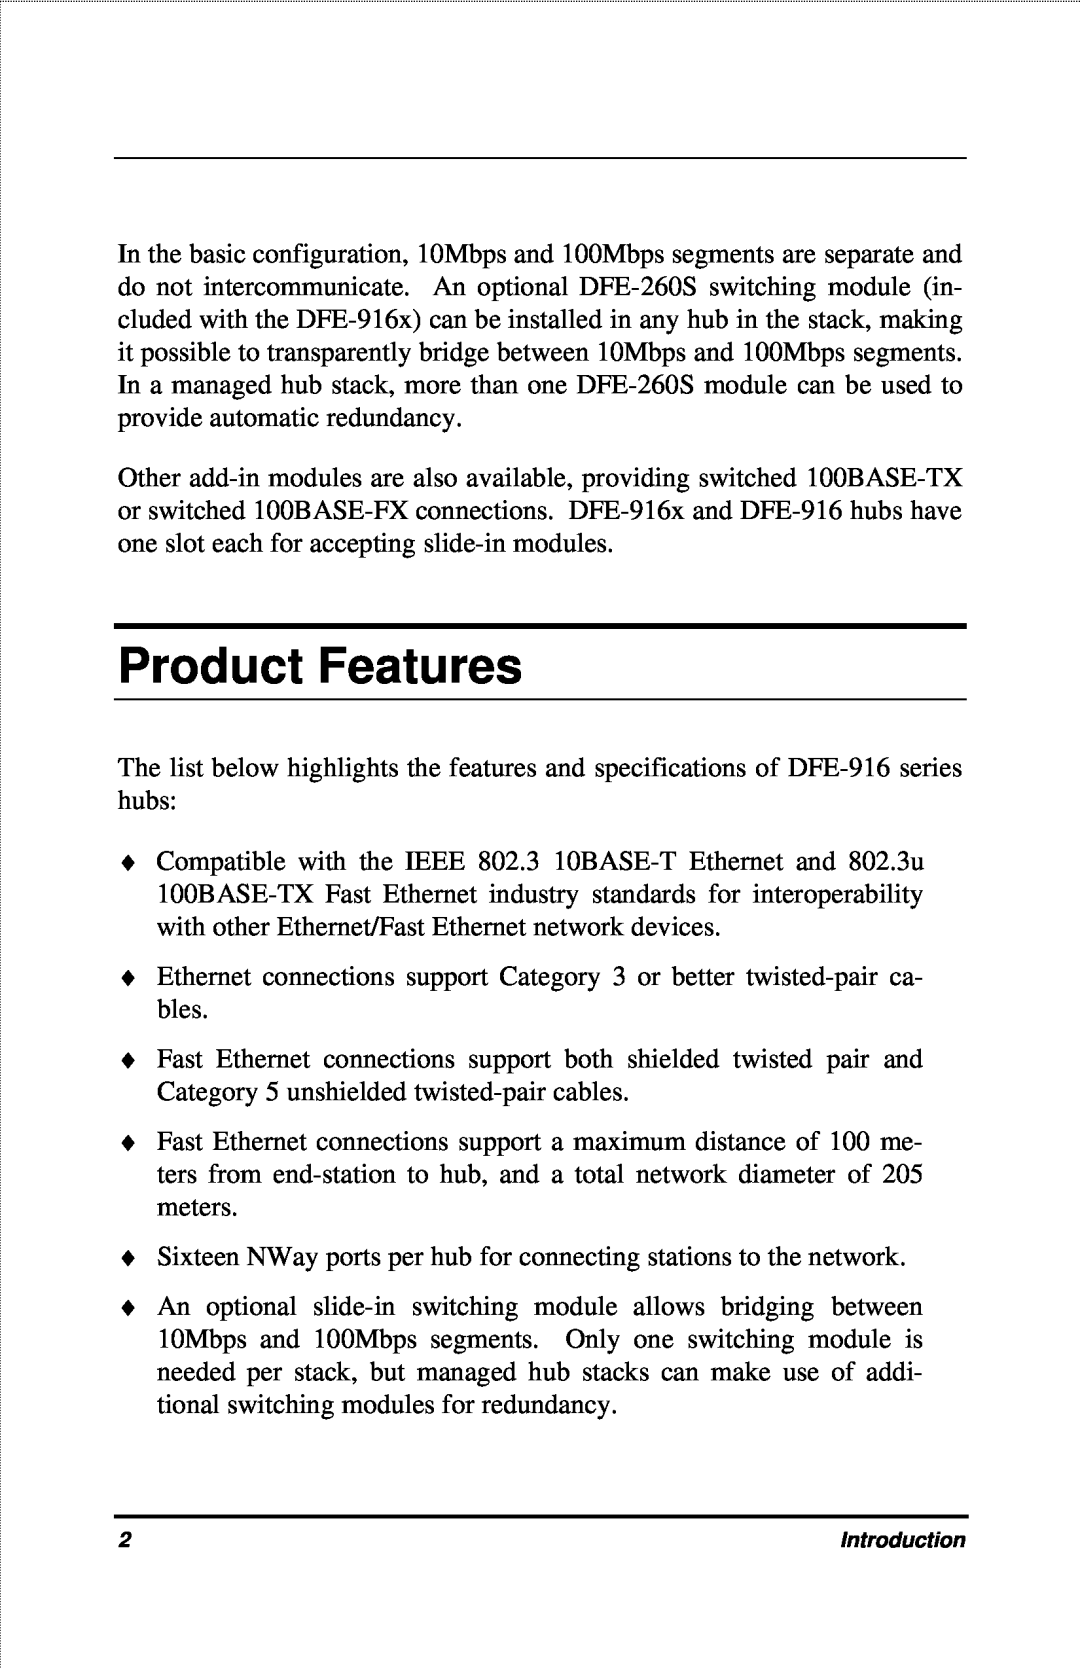 D-Link DFE-916X manual Product Features 